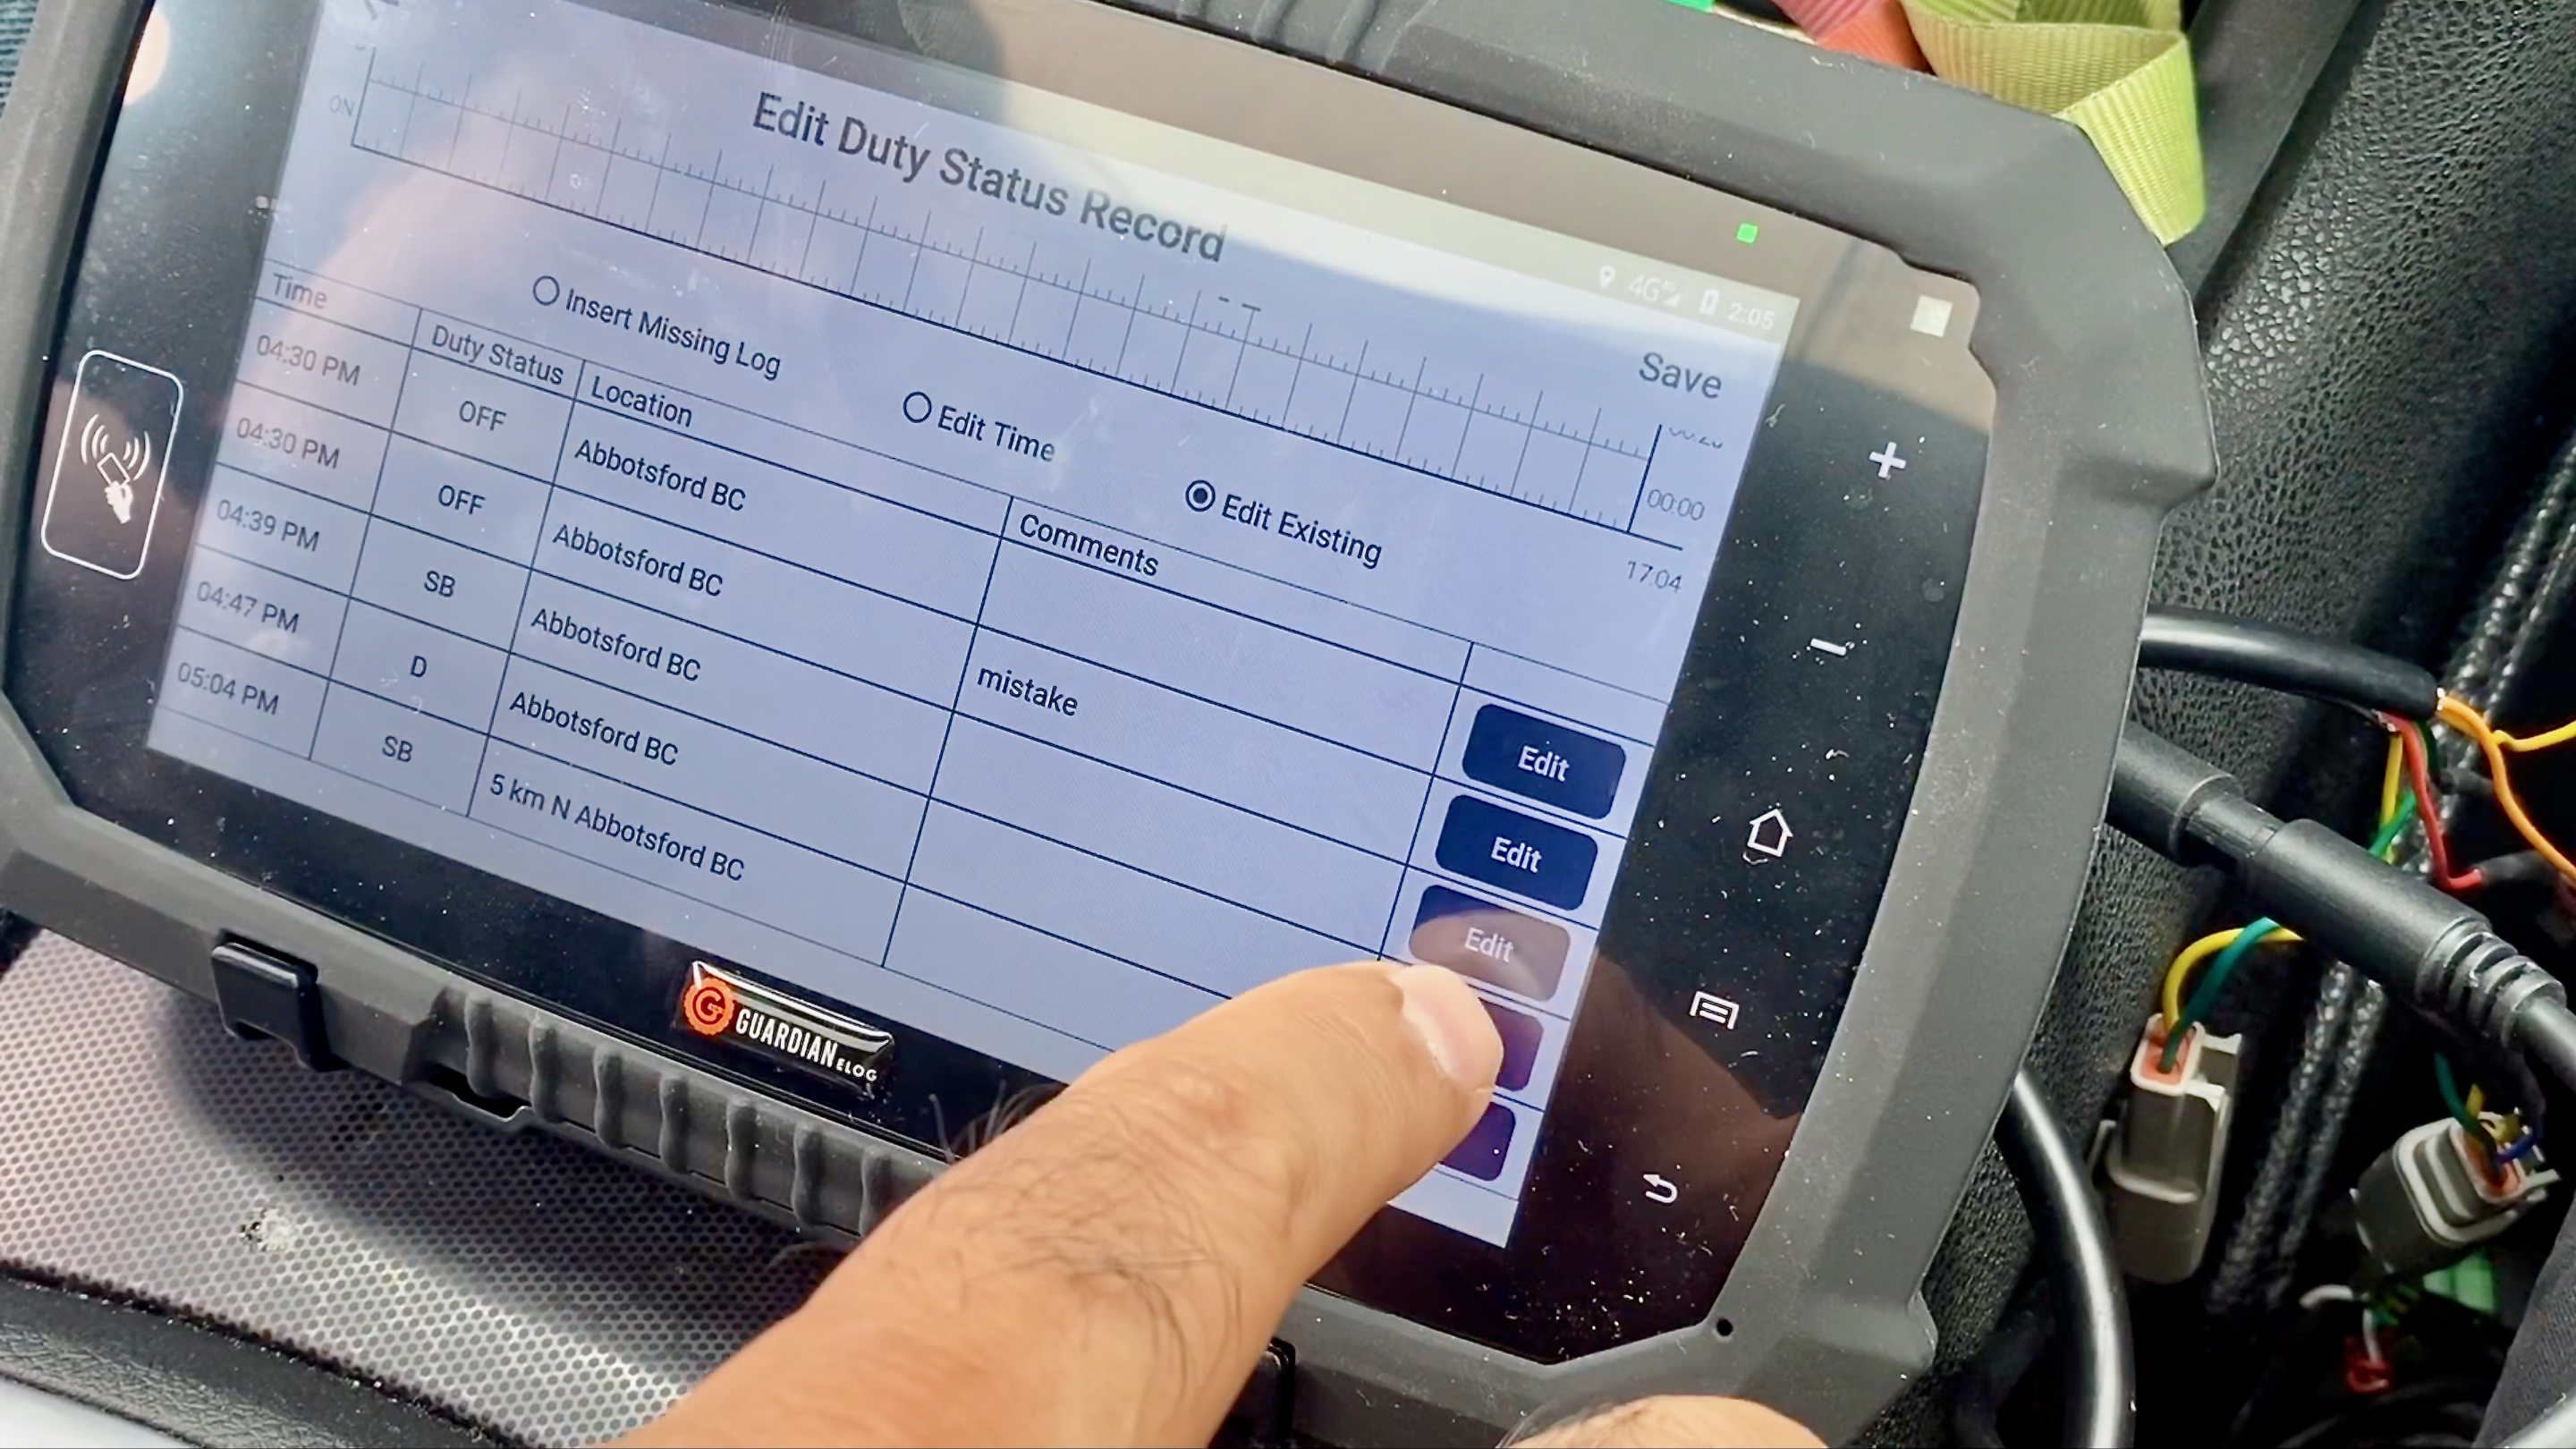 An electronic logging device screen being edited, with a finger being shown pushing a button on the screen.